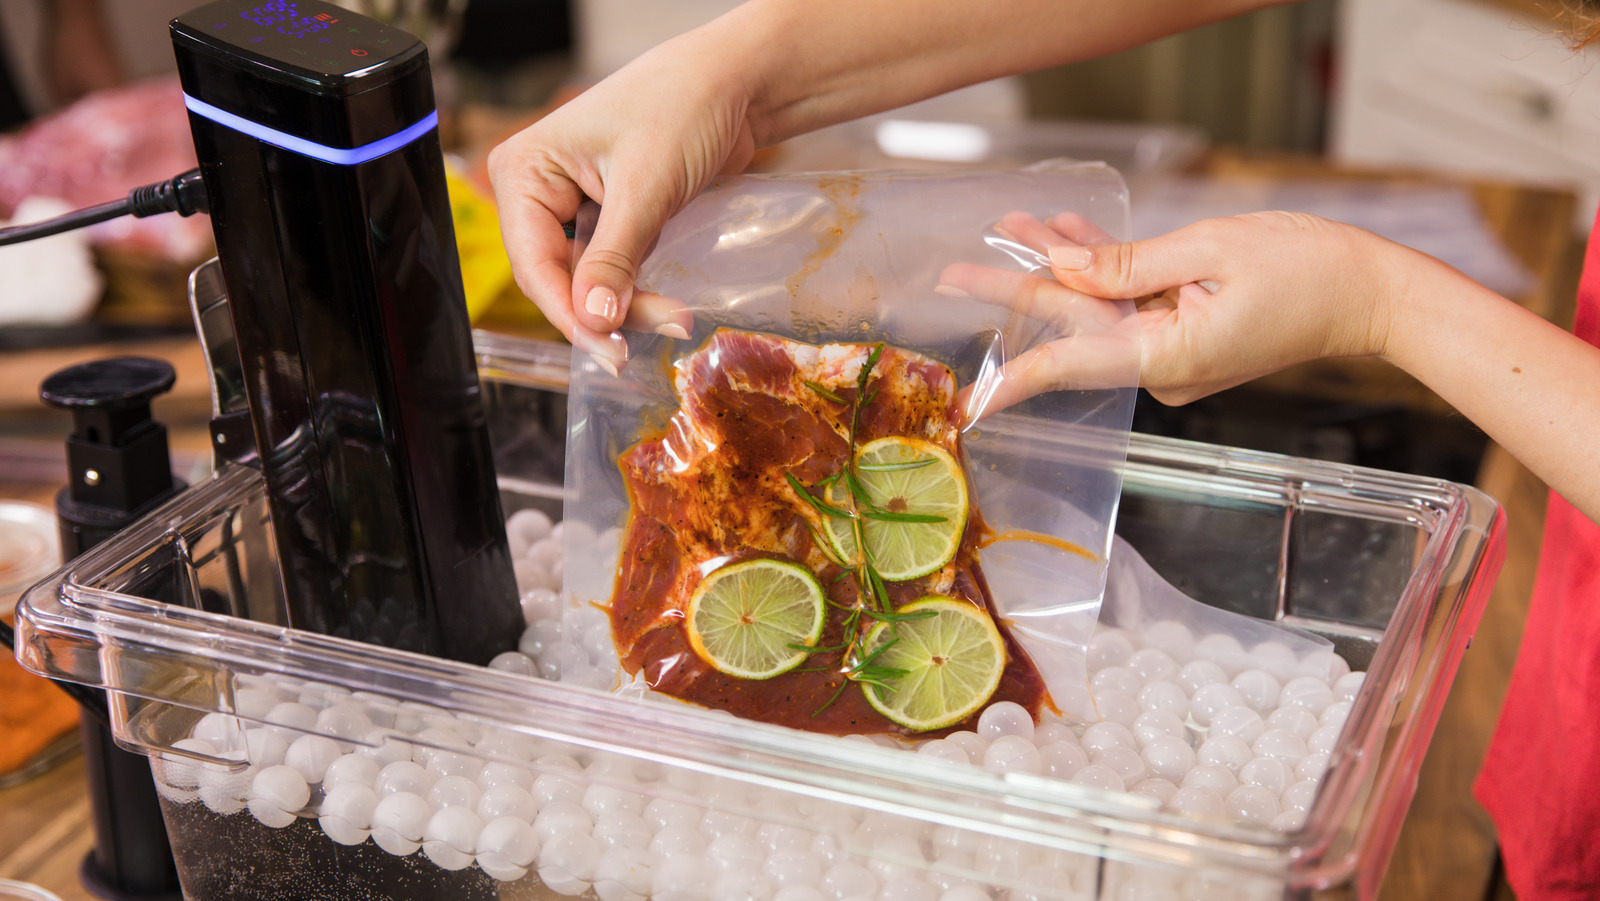 https://www.tastingtable.com/img/gallery/10-tips-you-need-when-sous-vide-cooking/l-intro-1646901834.jpg